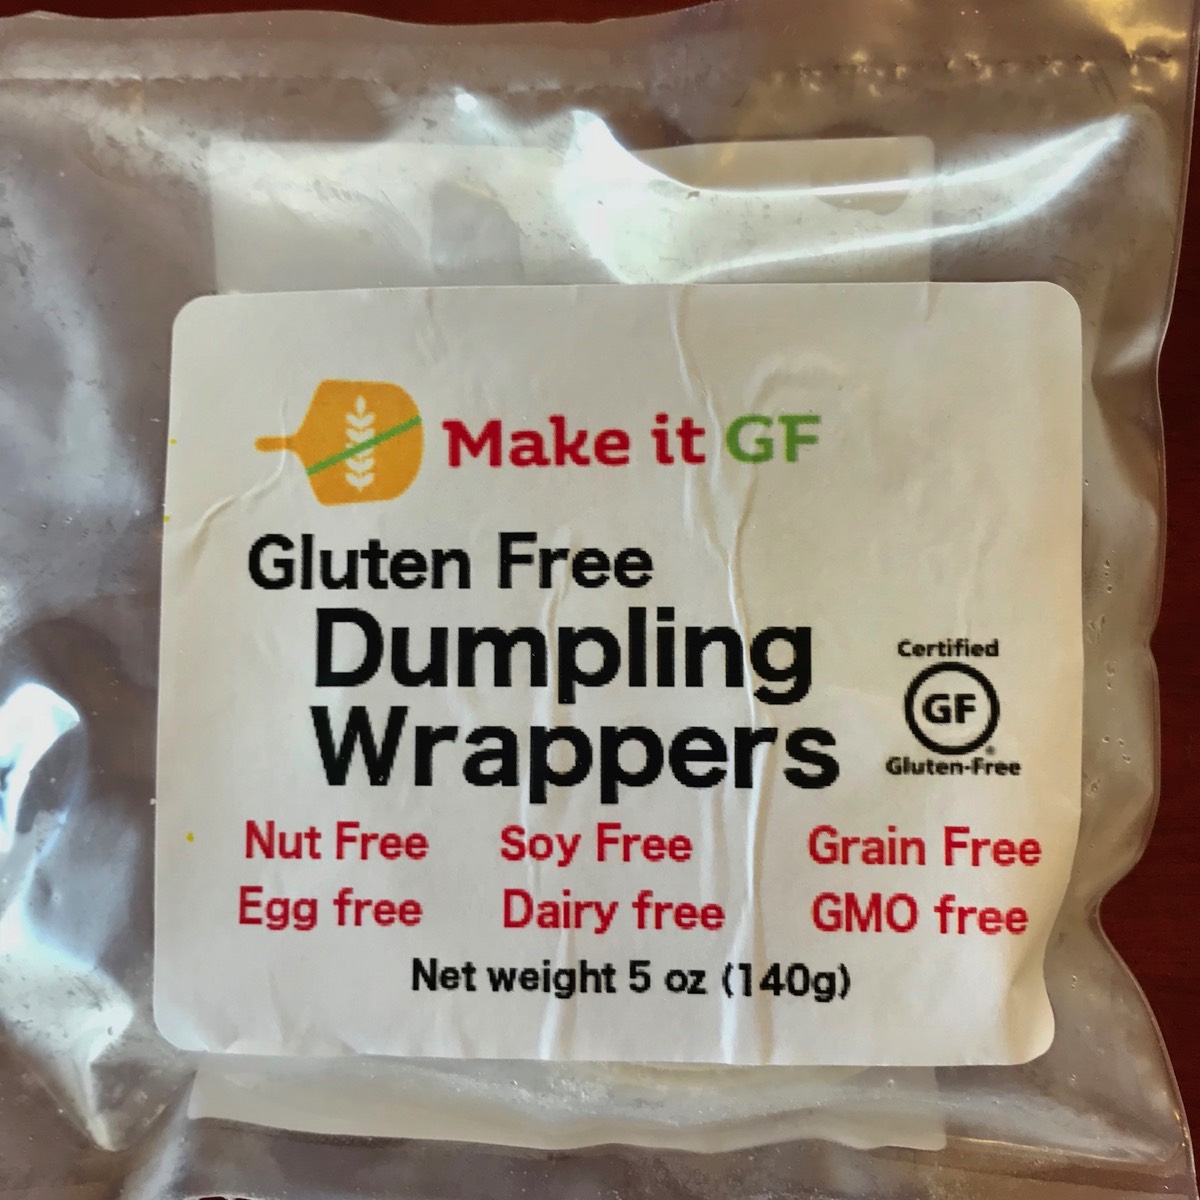 A package of dumpling wrappers